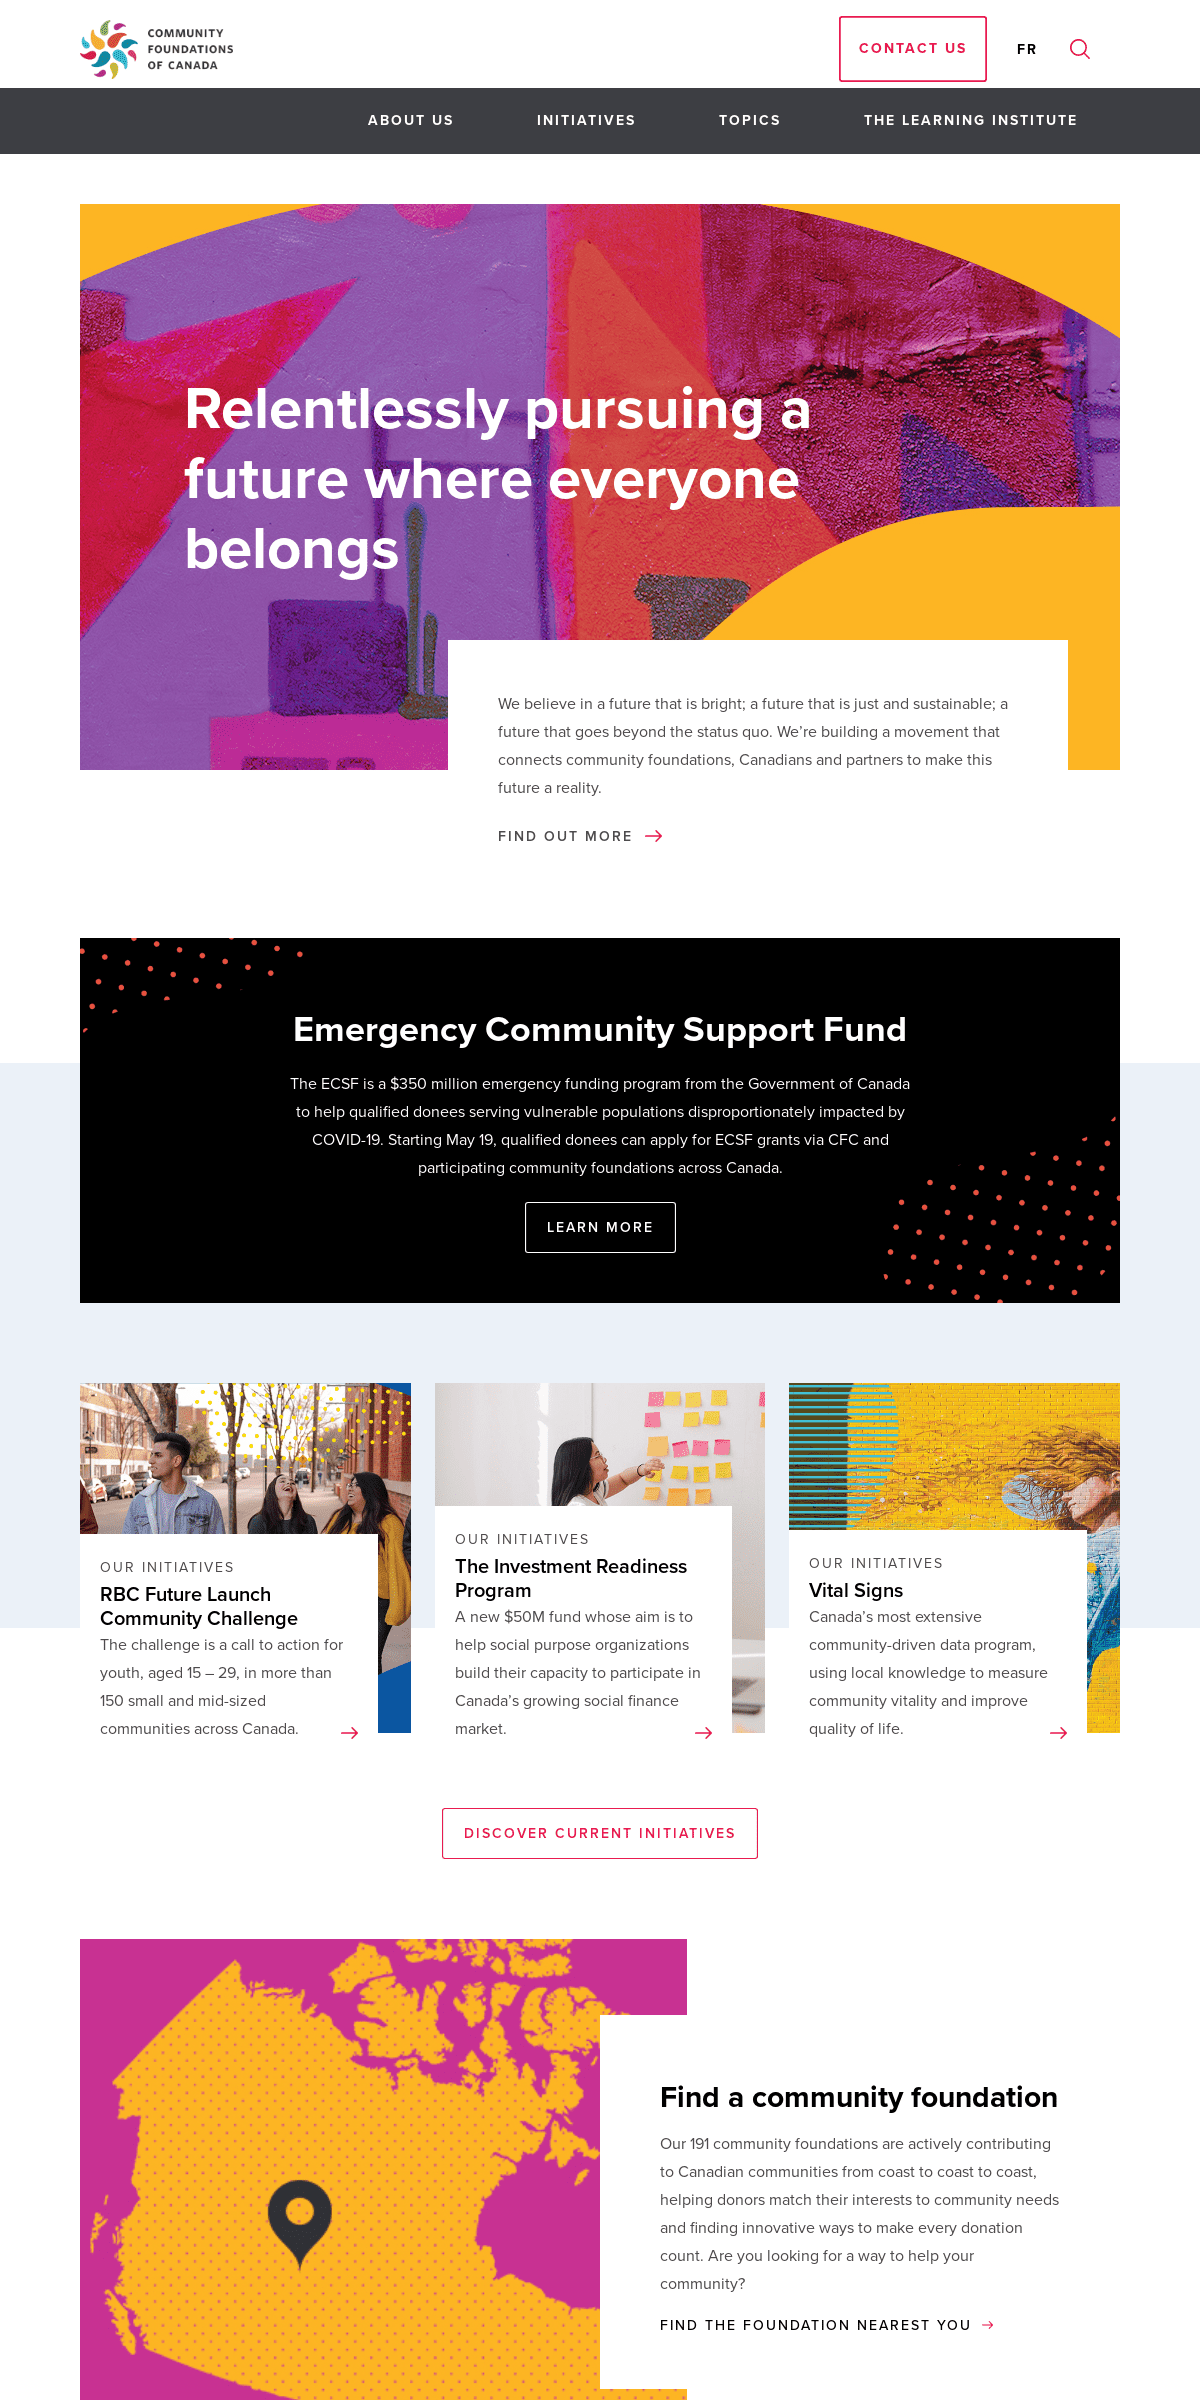 A complete backup of communityfoundations.ca